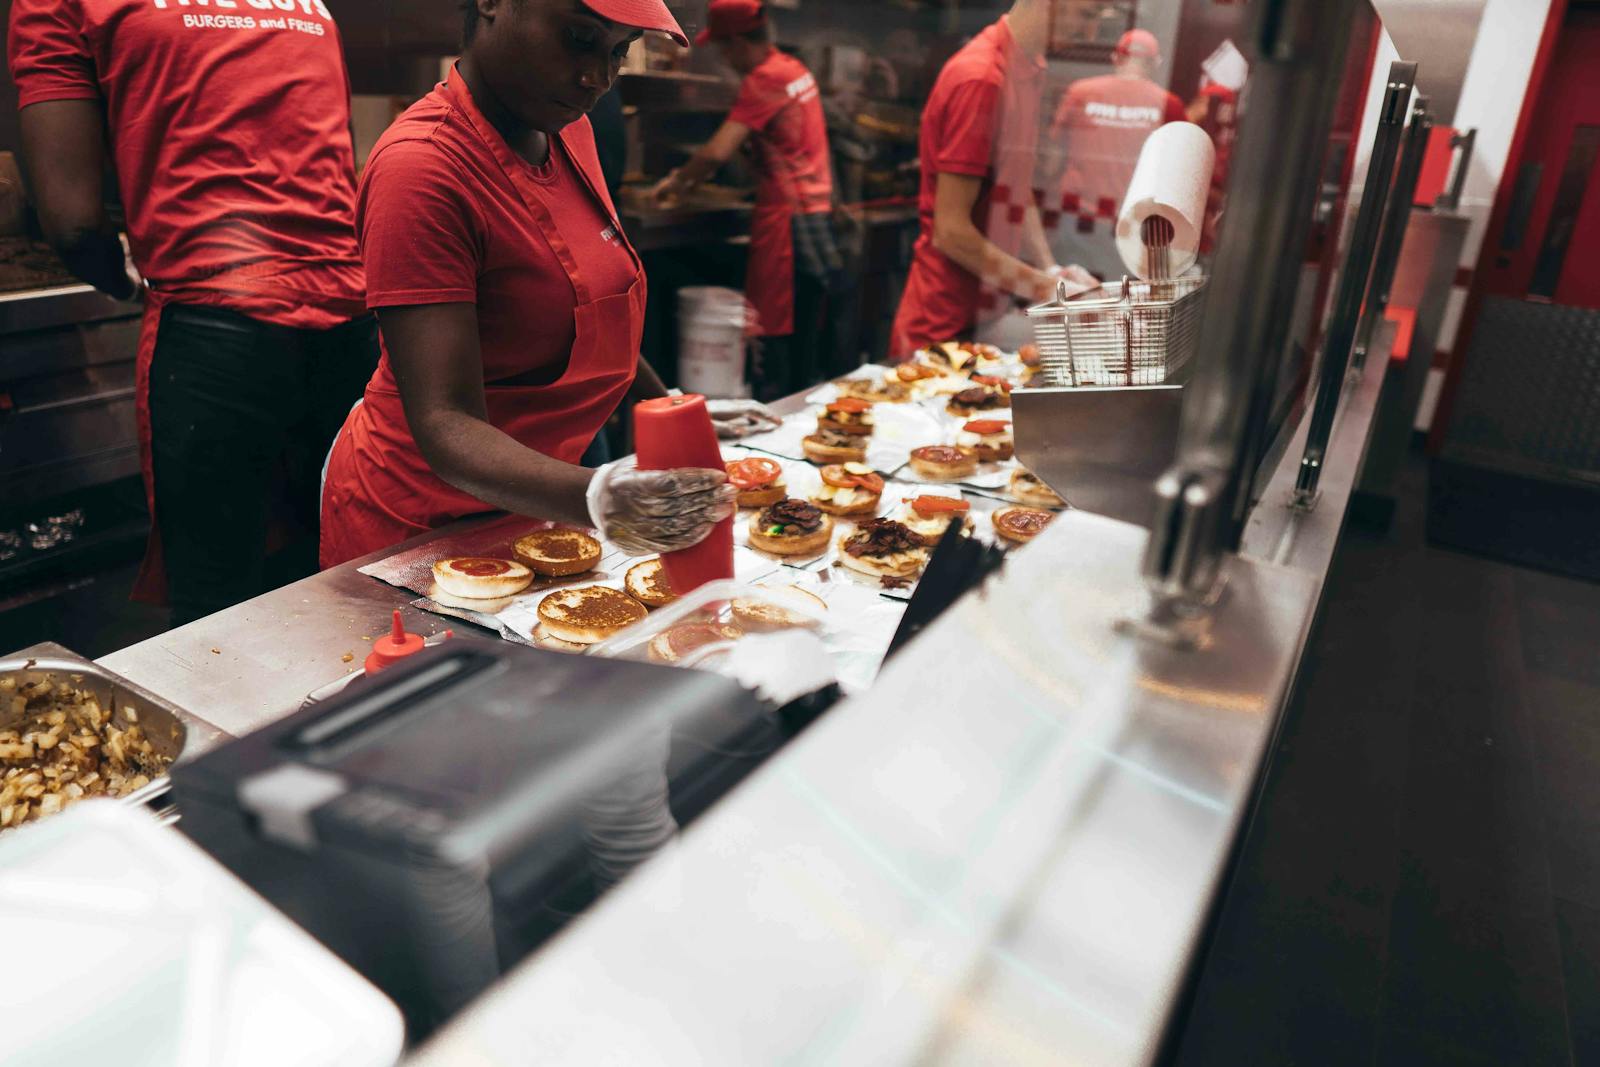 Image of workers preparing food in a chain restaurant